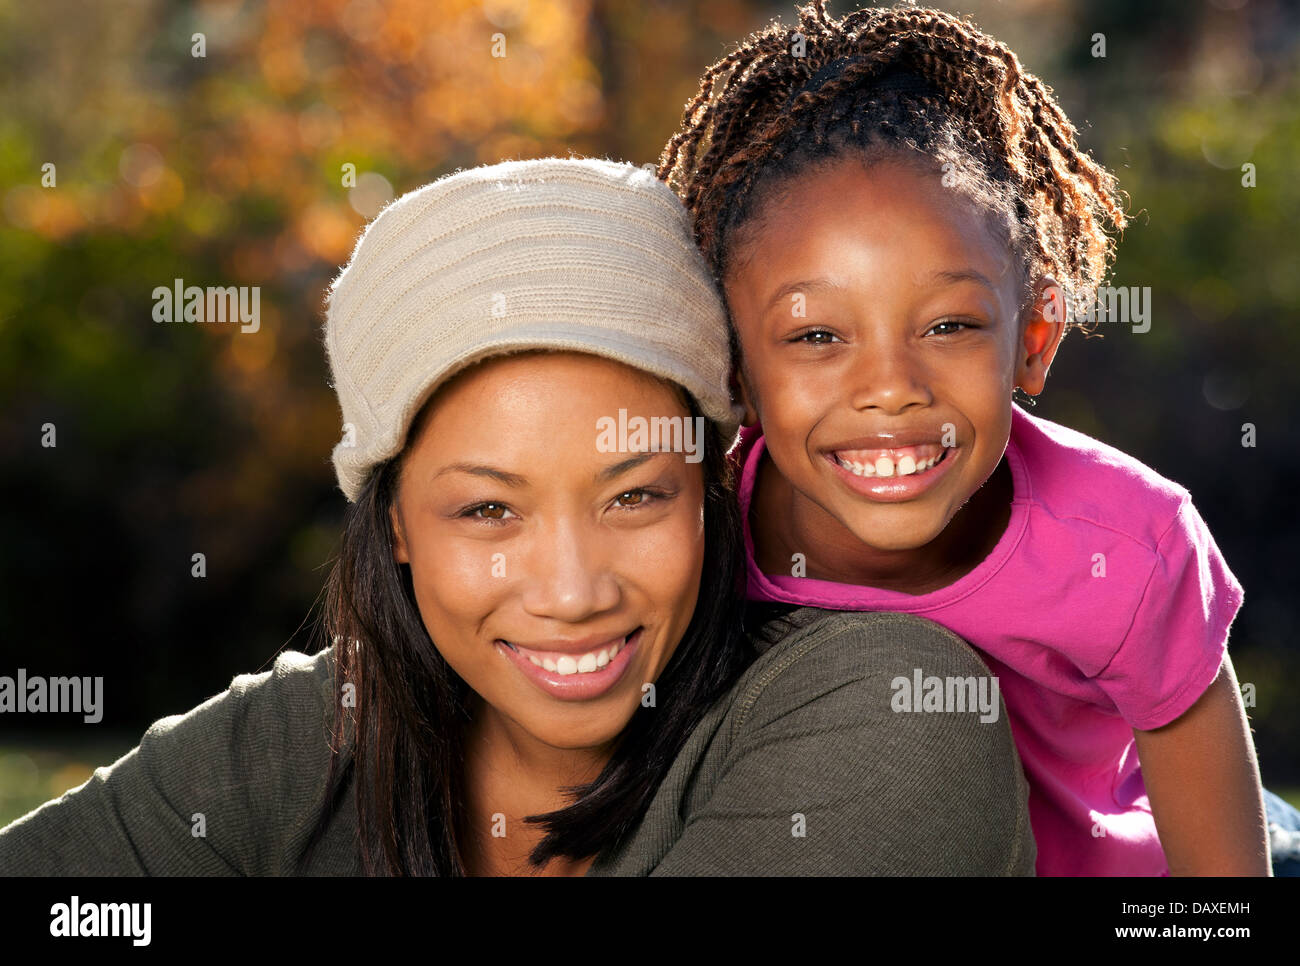 African American mother and child having fun spending time together in a park Stock Photo